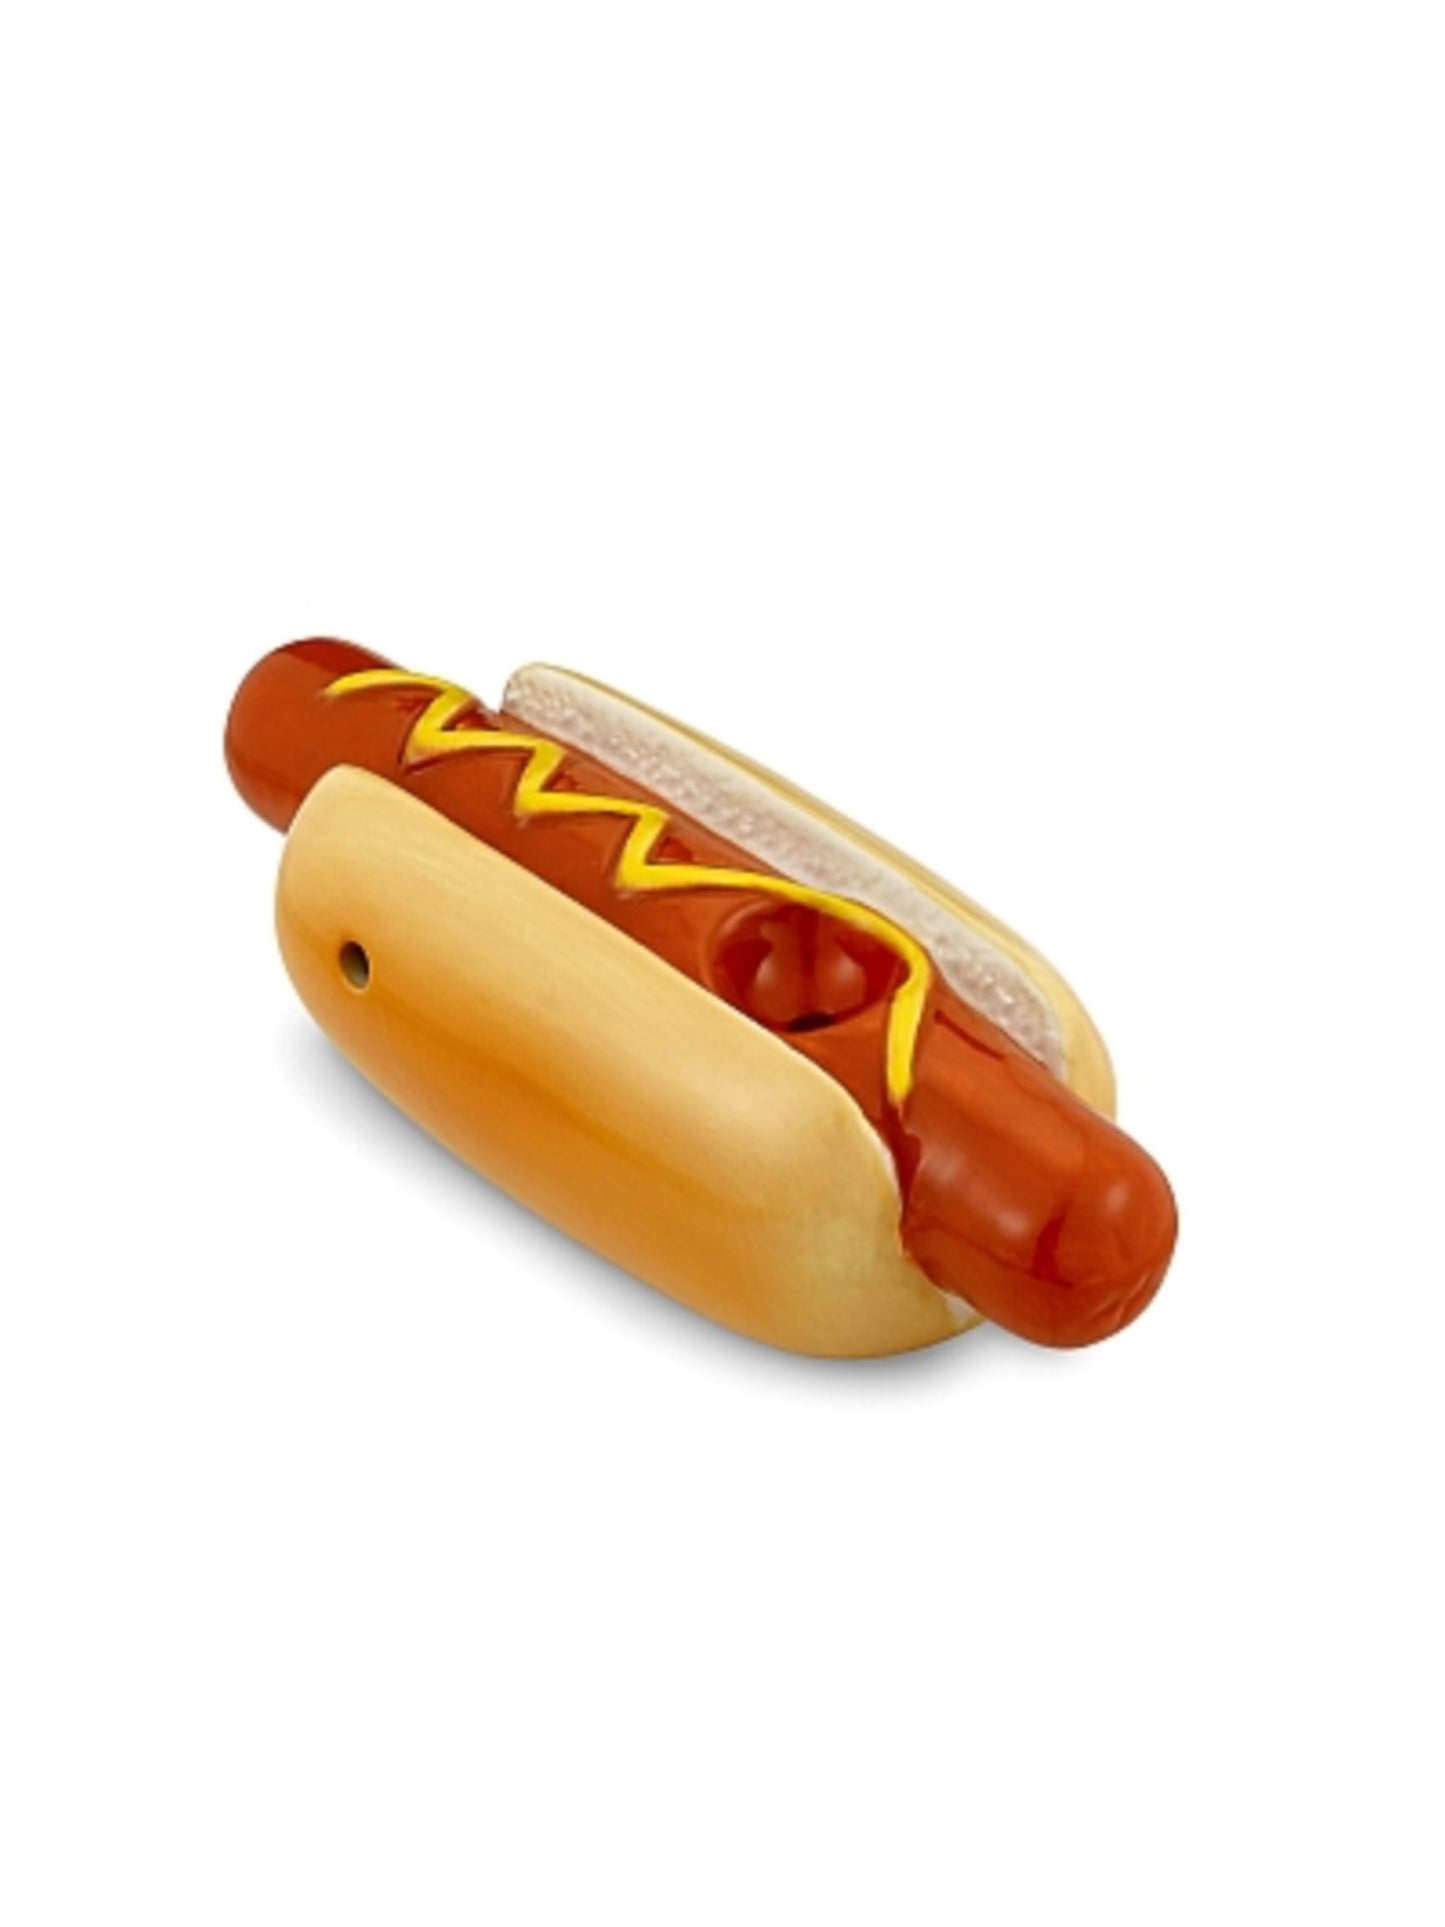 Hot Dog Pipe